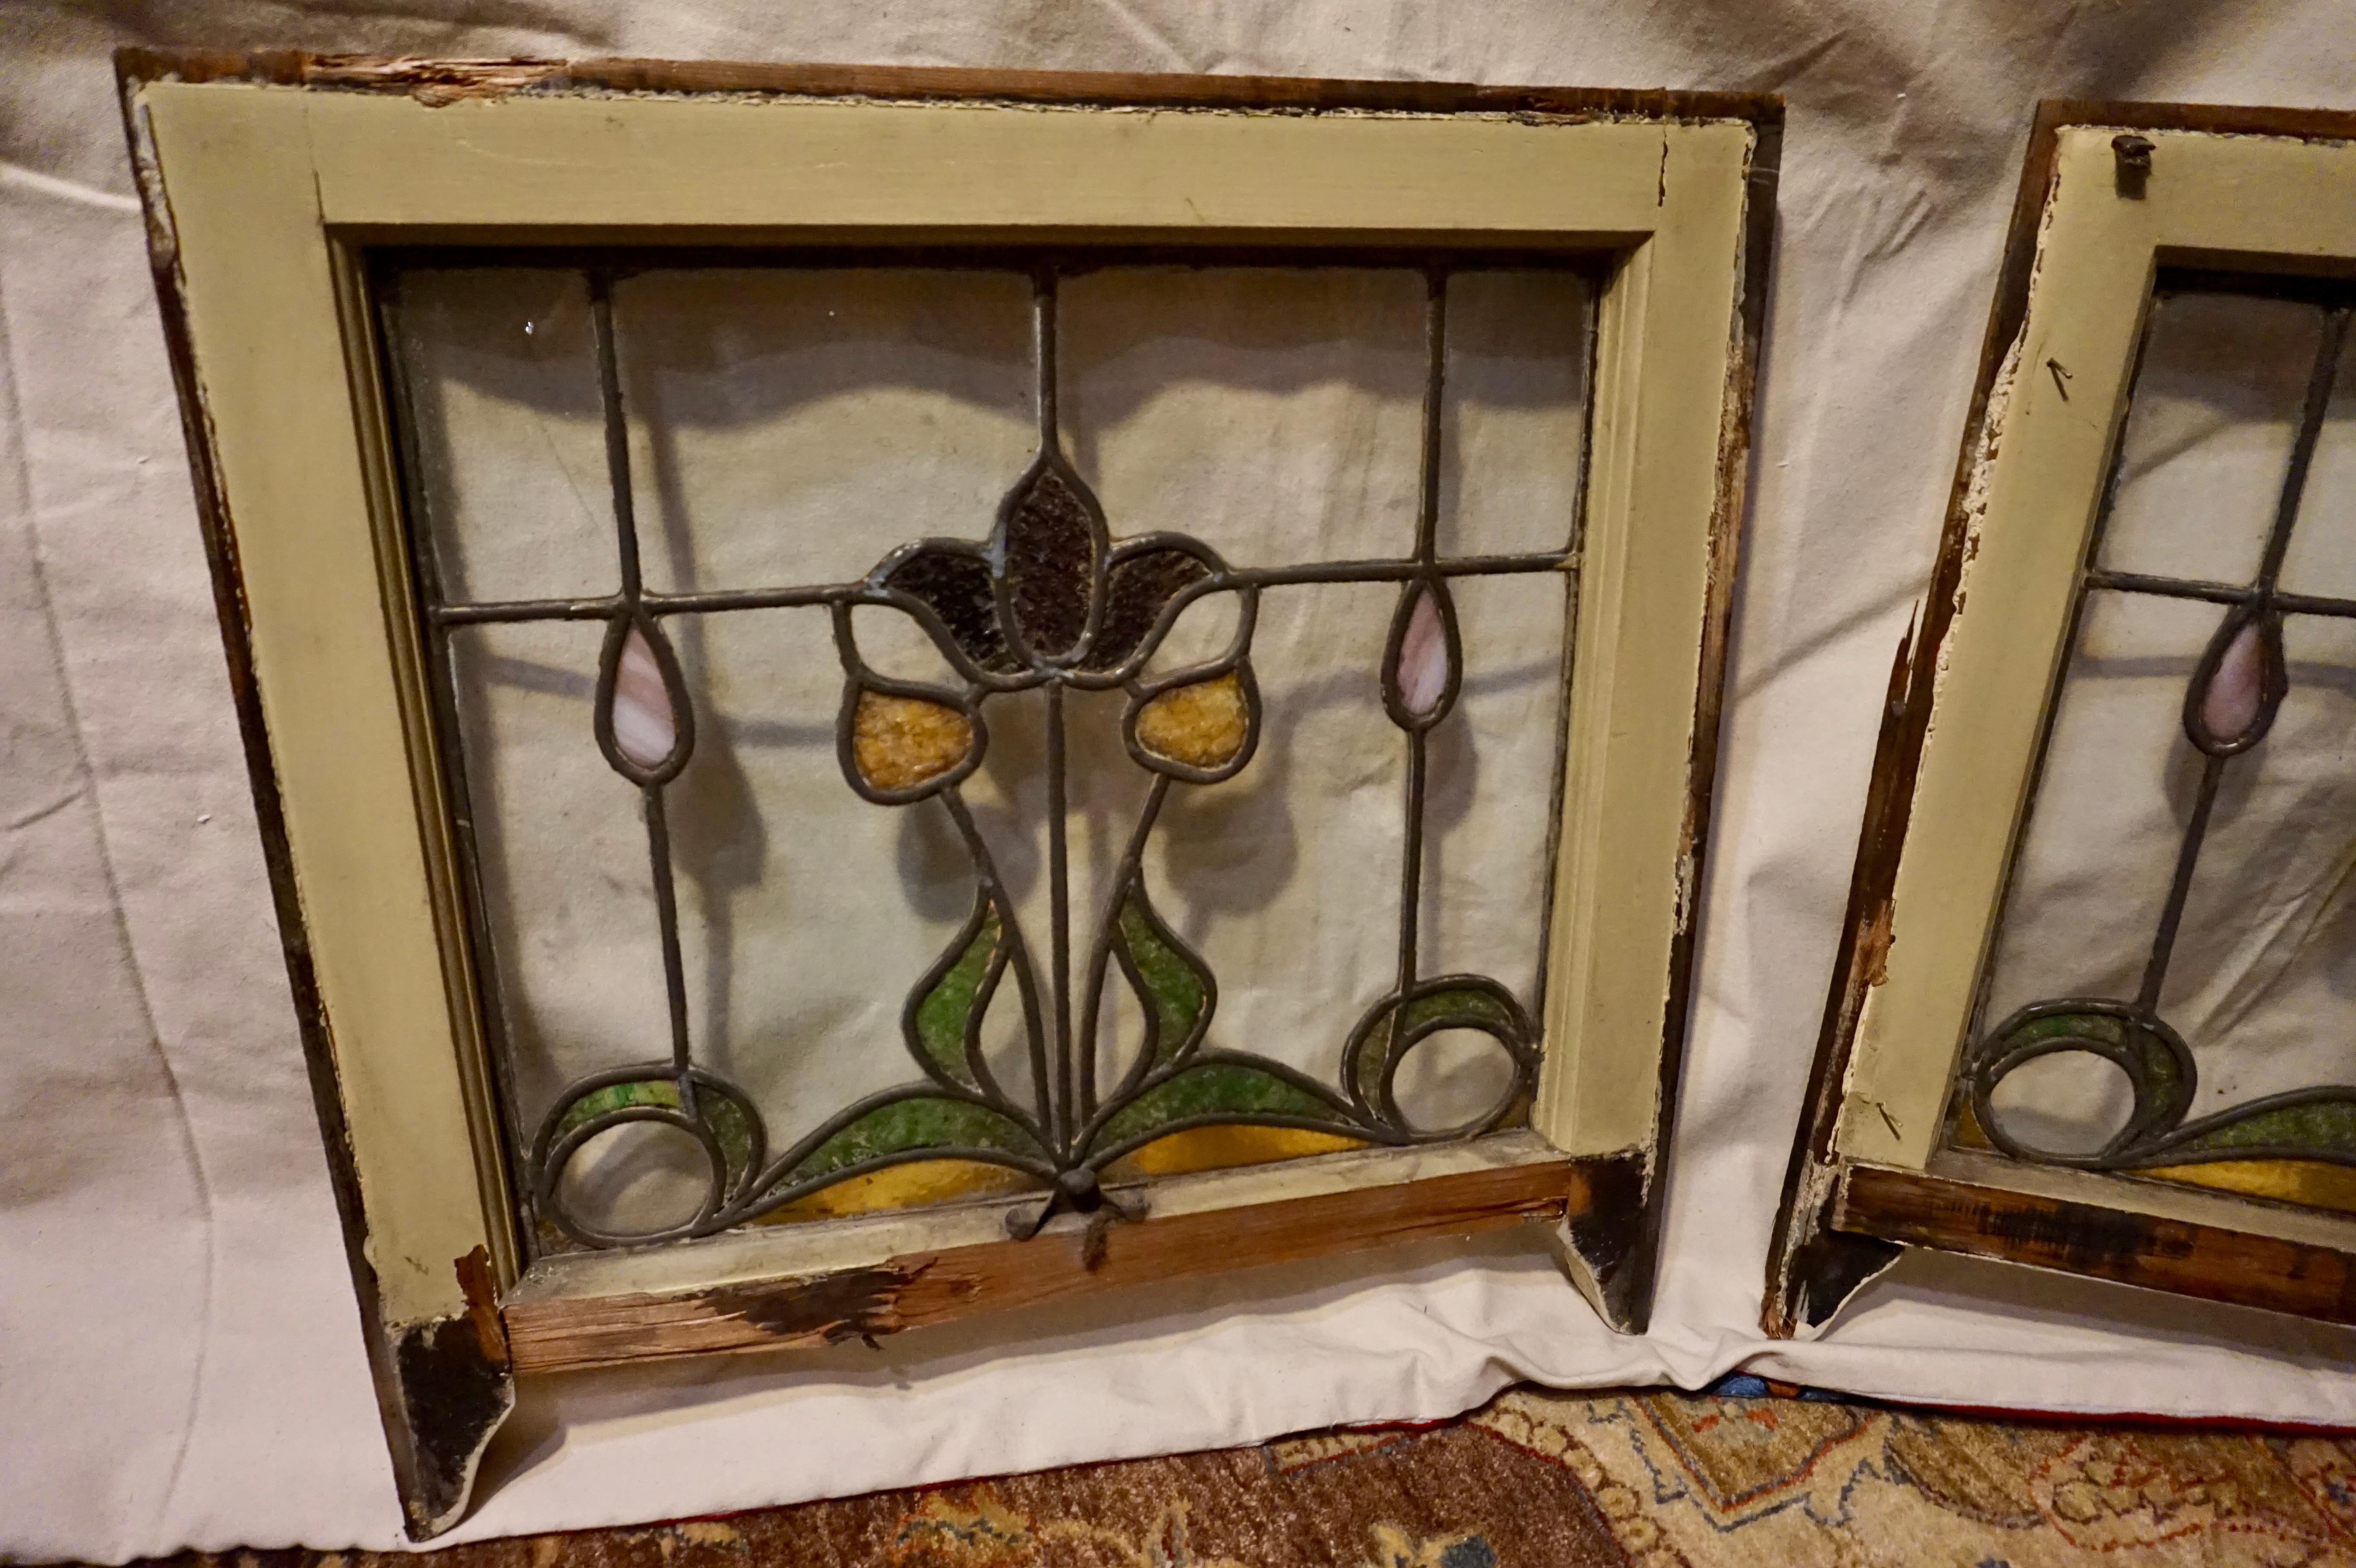 Pair Of Rare Art Nouveau Stain Glass Windows With Scrolling Tulip & Bud Motif In Good Condition For Sale In Vancouver, British Columbia